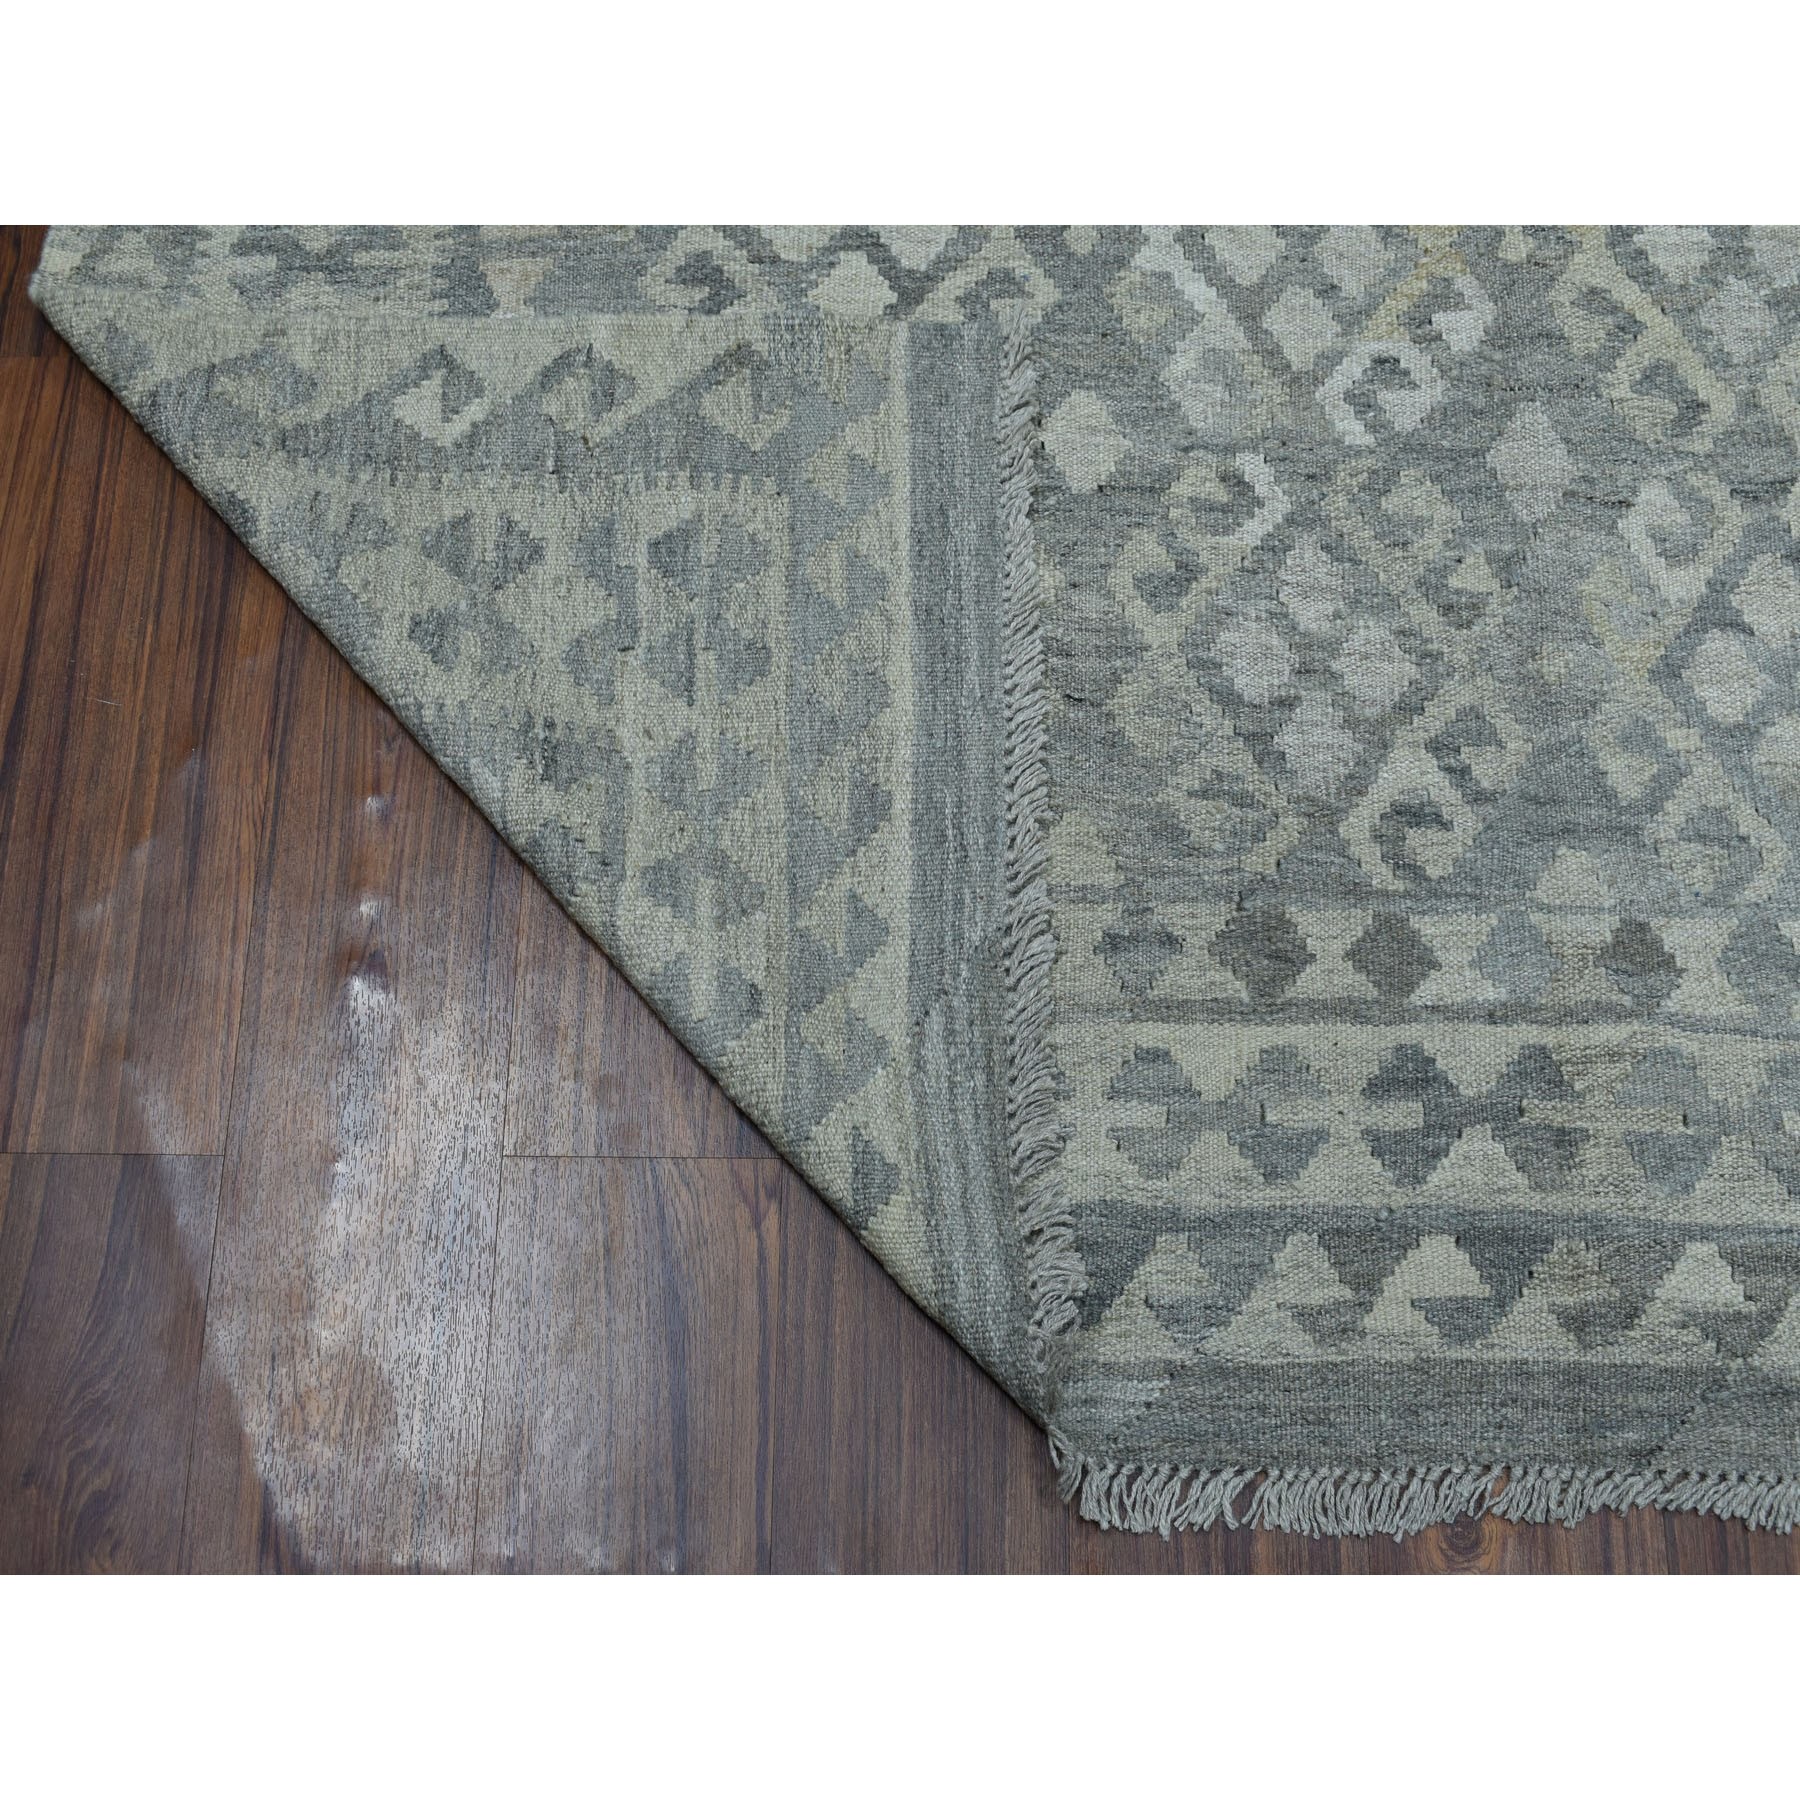 6-x7-9  Undyed Natural Wool Afghan Kilim Reversible Hand Woven Oriental Rug 